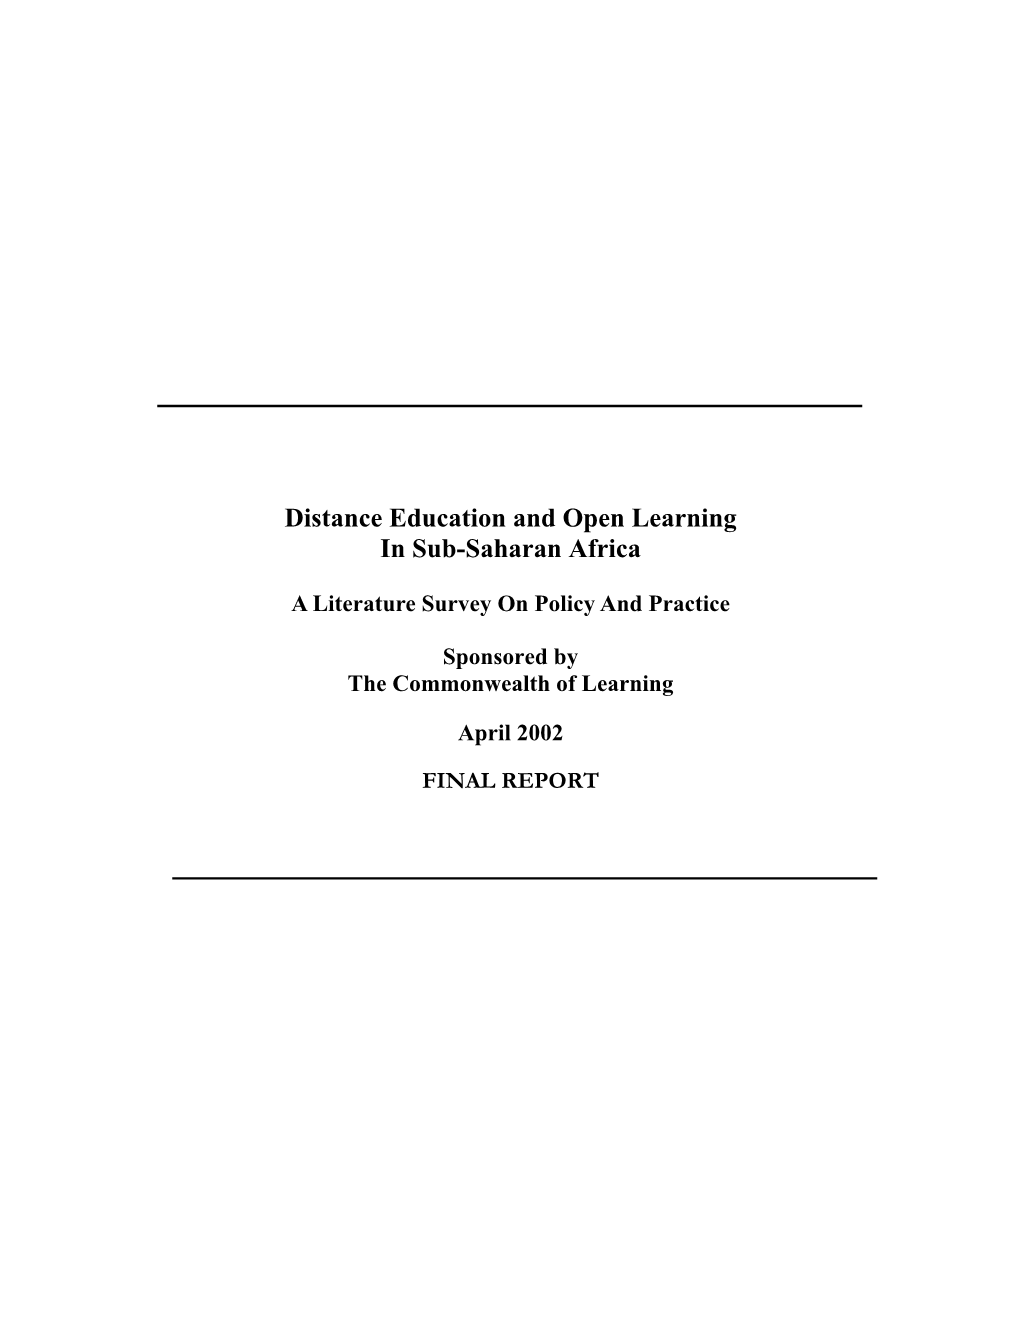 Distance Education and Open Learning in Sub-Saharan Africa – A